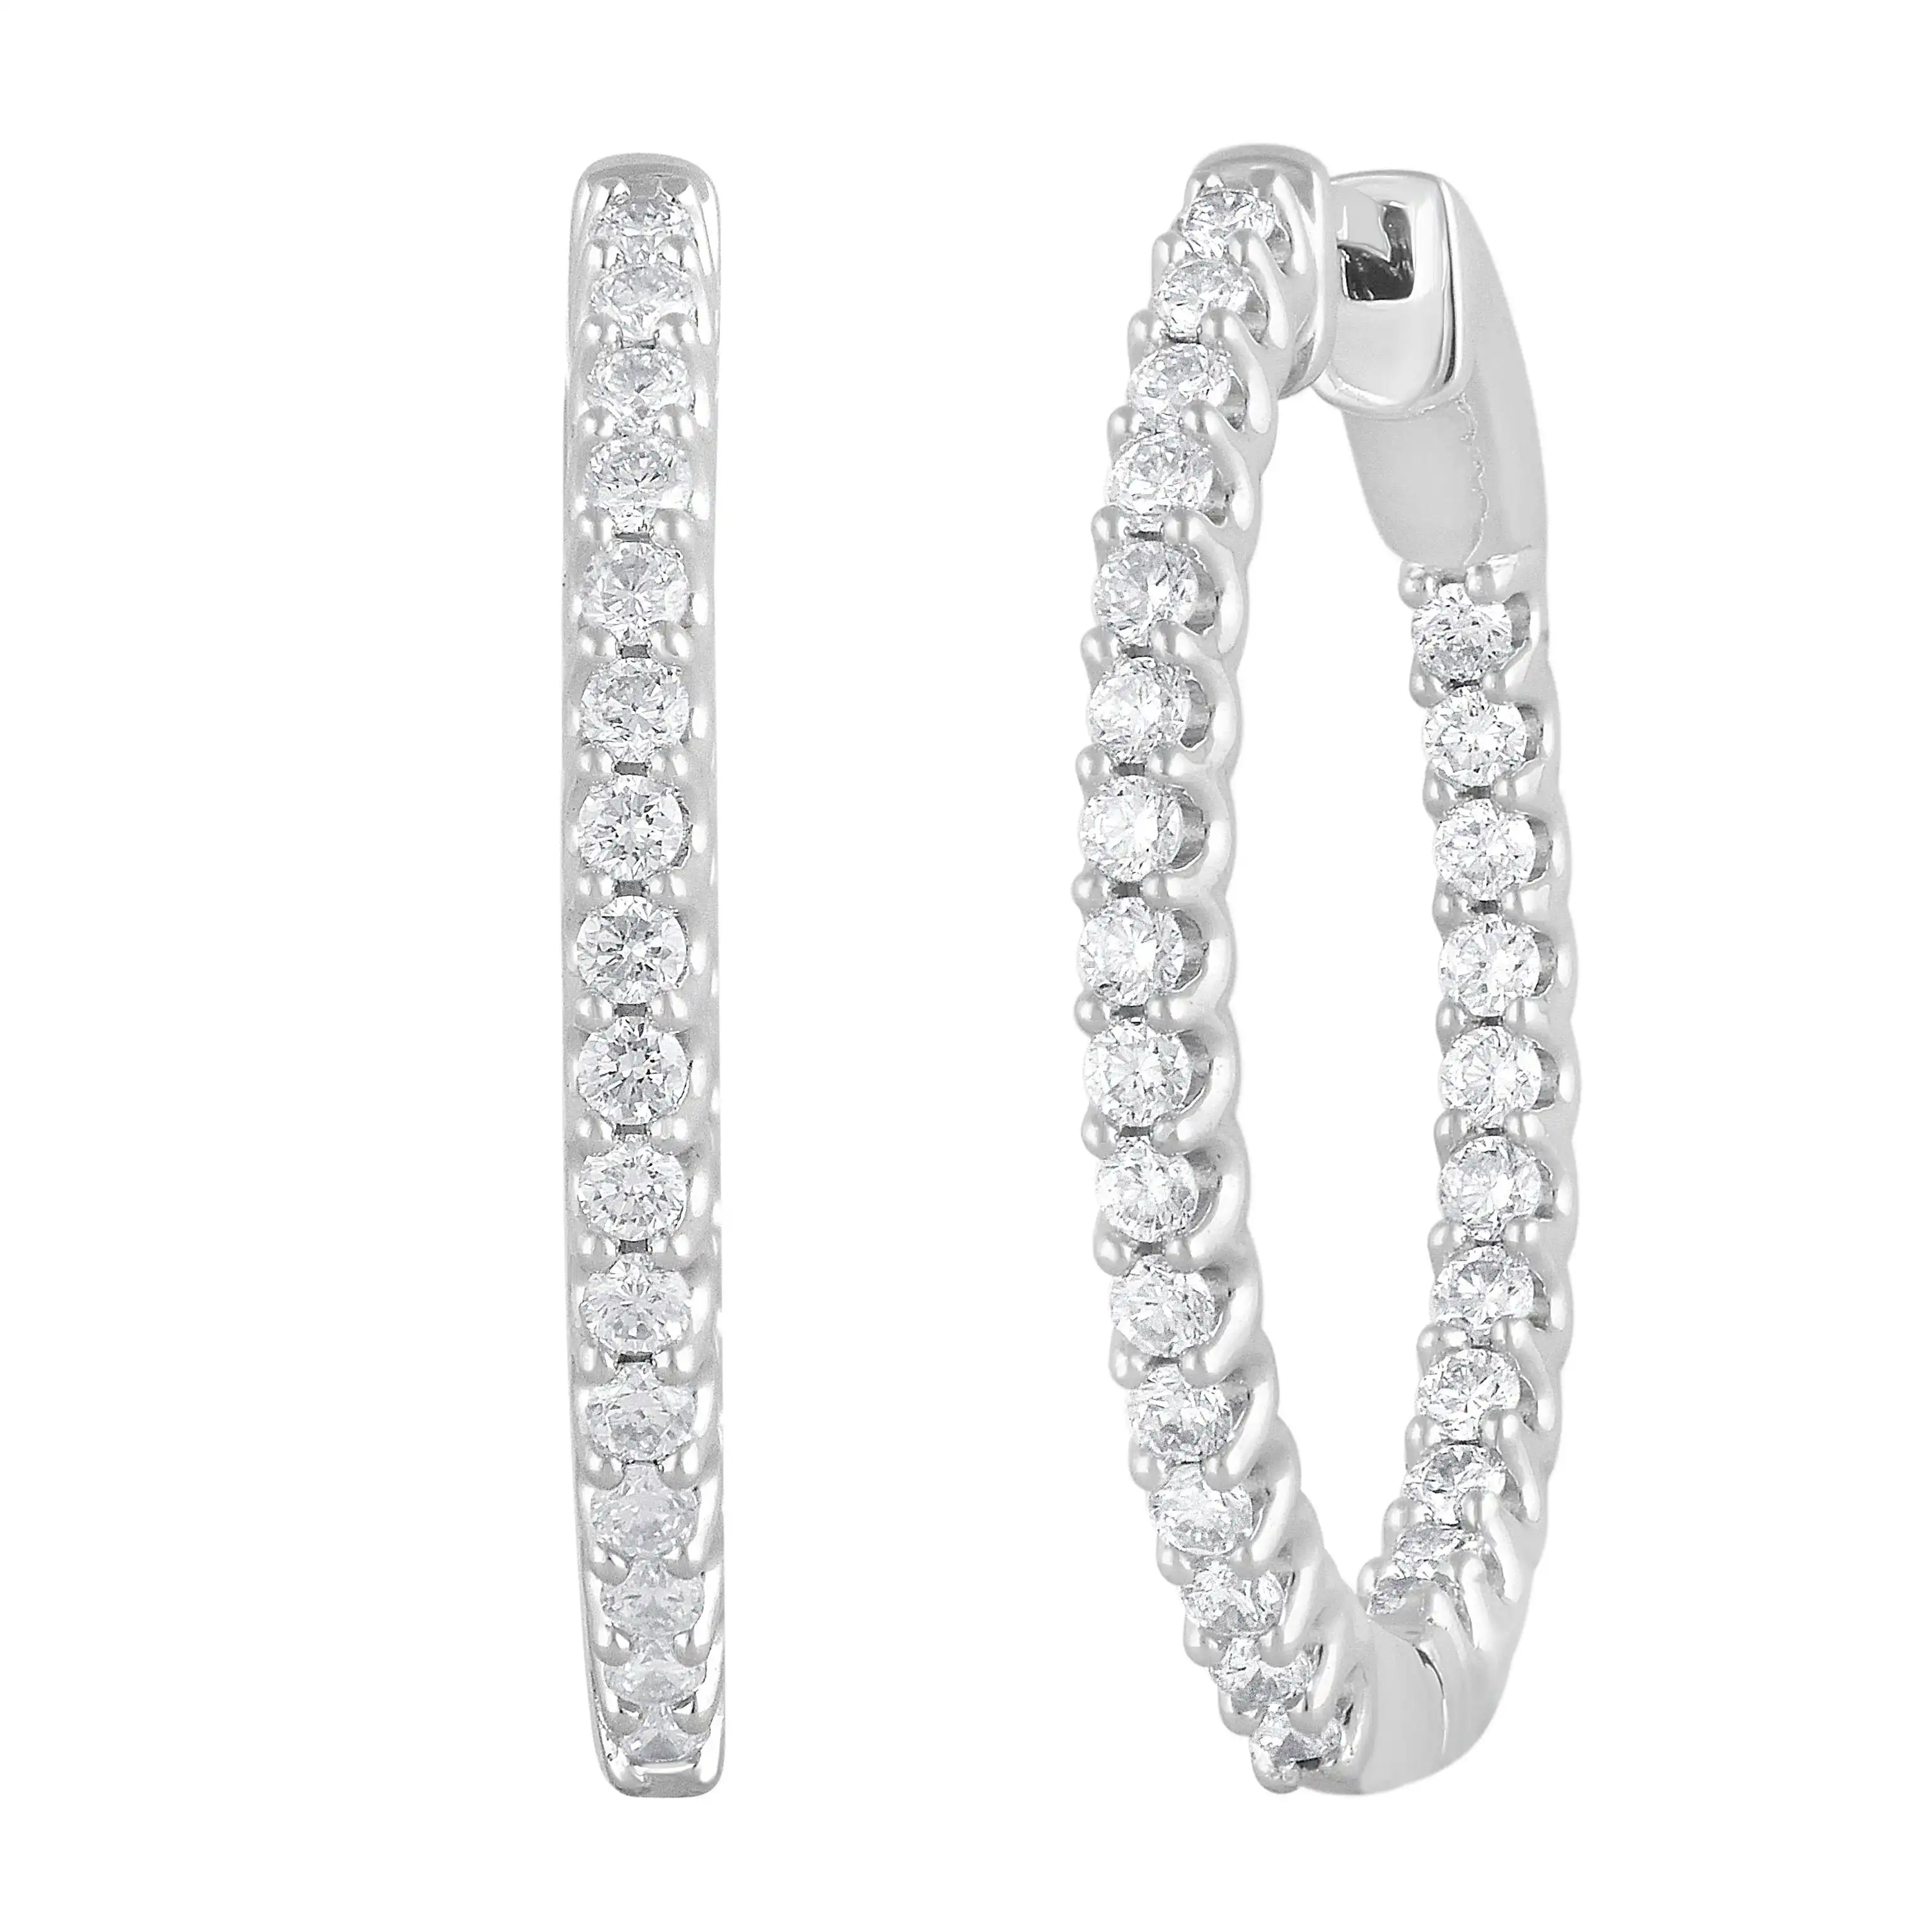 Mirage Hoop Earrings with 1.00ct of Laboratory Grown Diamonds in Sterling Silver and Platinum